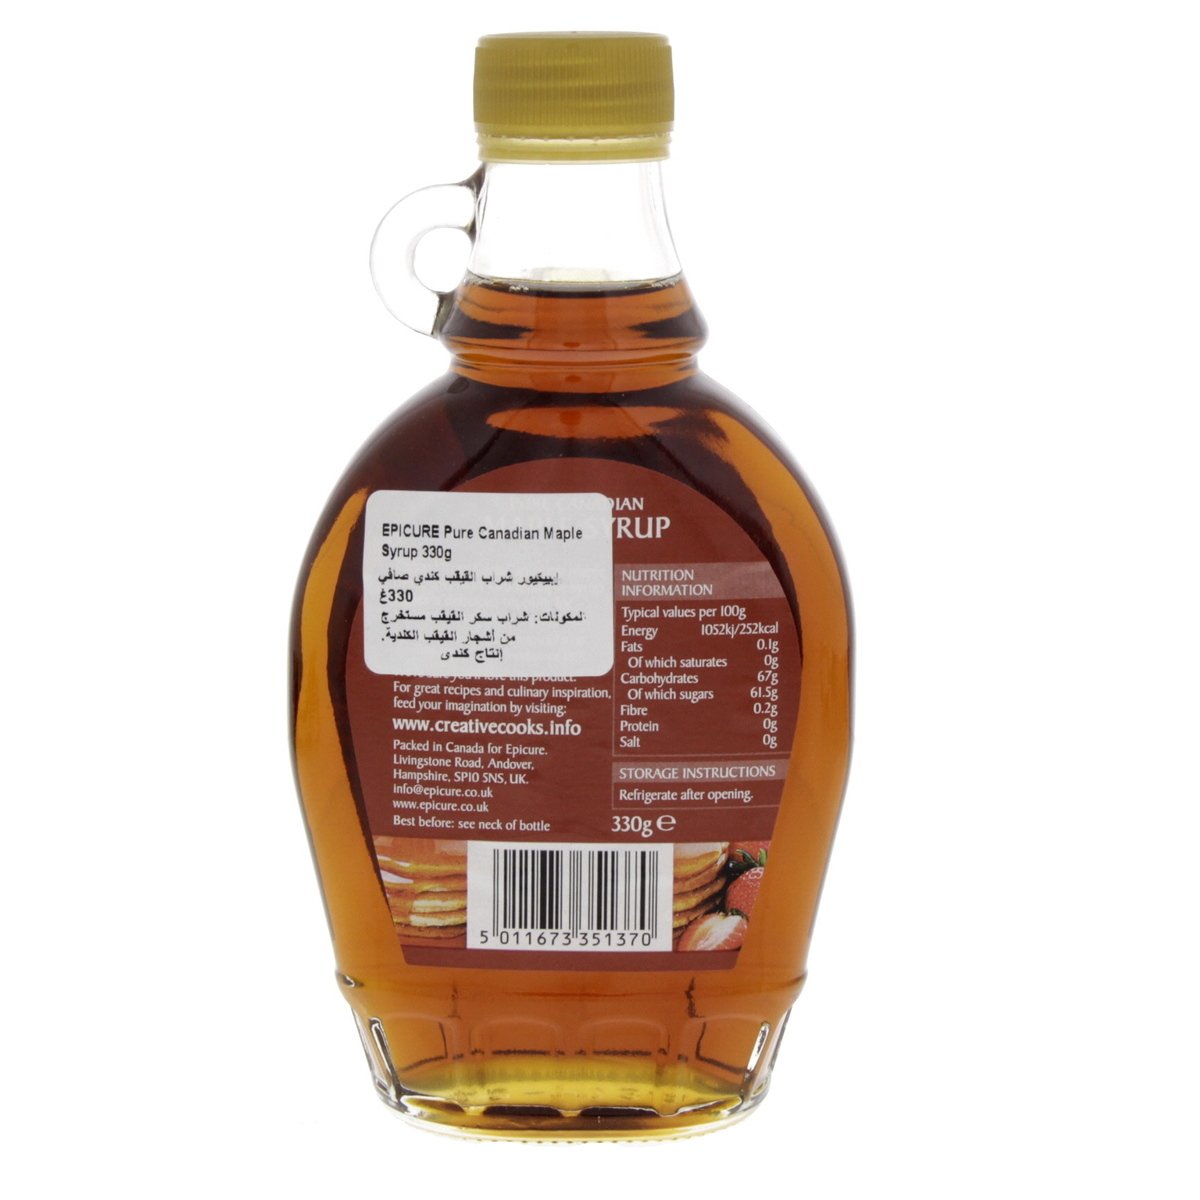 Epicure Pure Canadian Maple Syrup 330 g